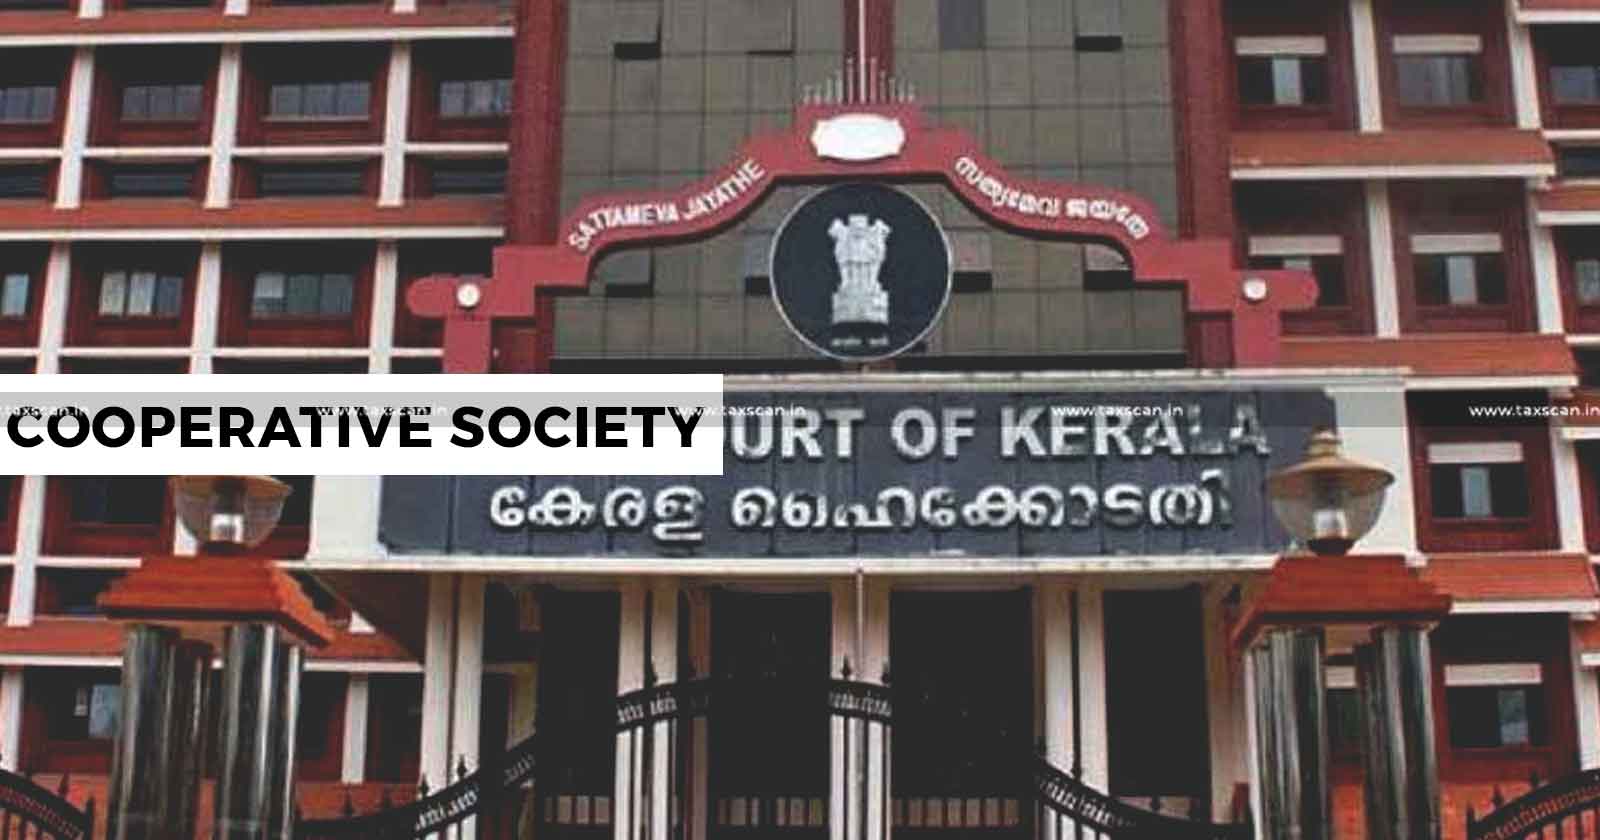 No Direction - to - Refund - Income - Tax - Co-operative Society - Kerala HC - Appeal - Dispose - TAXSCAN